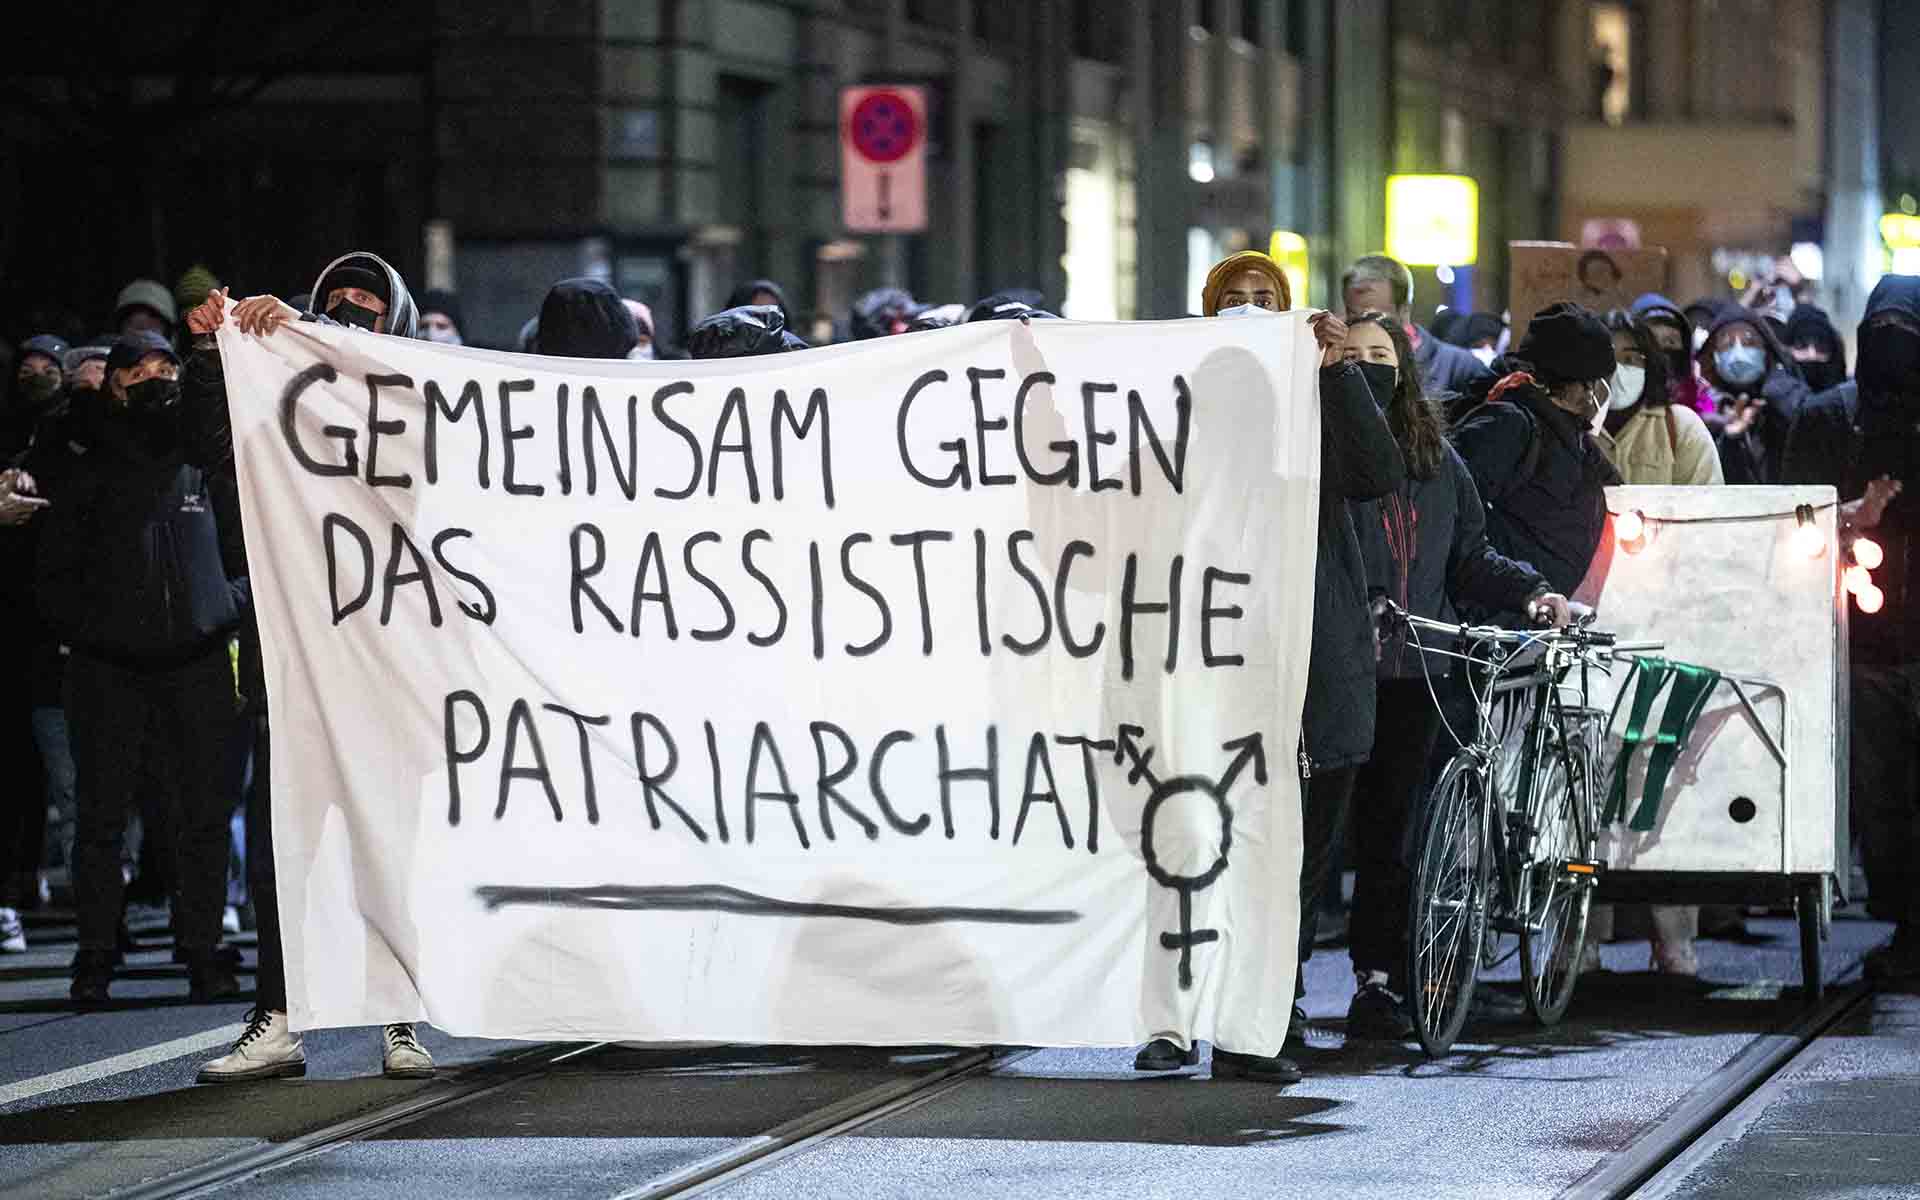 Zürich (Switzerland), 07/03/2021.- Demonstrators hold a banner with the words 'together against racist patriarchy' in a protest after the Burqa ban referendum was narrowly accepted by the electorate, in Zurich, Switzerland, 07 March 2021. Swiss citizens voted on a proposal to prohibit the concealment of one's face in the public space. Led by right-wing groups, the so-called 'anti-burqa' initiative provides for a ban on the wearing of the niqab, as well as other non-religious forms of face concealment. The referendum provisional official results showed the ban passed by a 51.2 to 48.8 percent margin. (Protestas, Suiza) EFE/EPA/ALEXANDRA WEY
